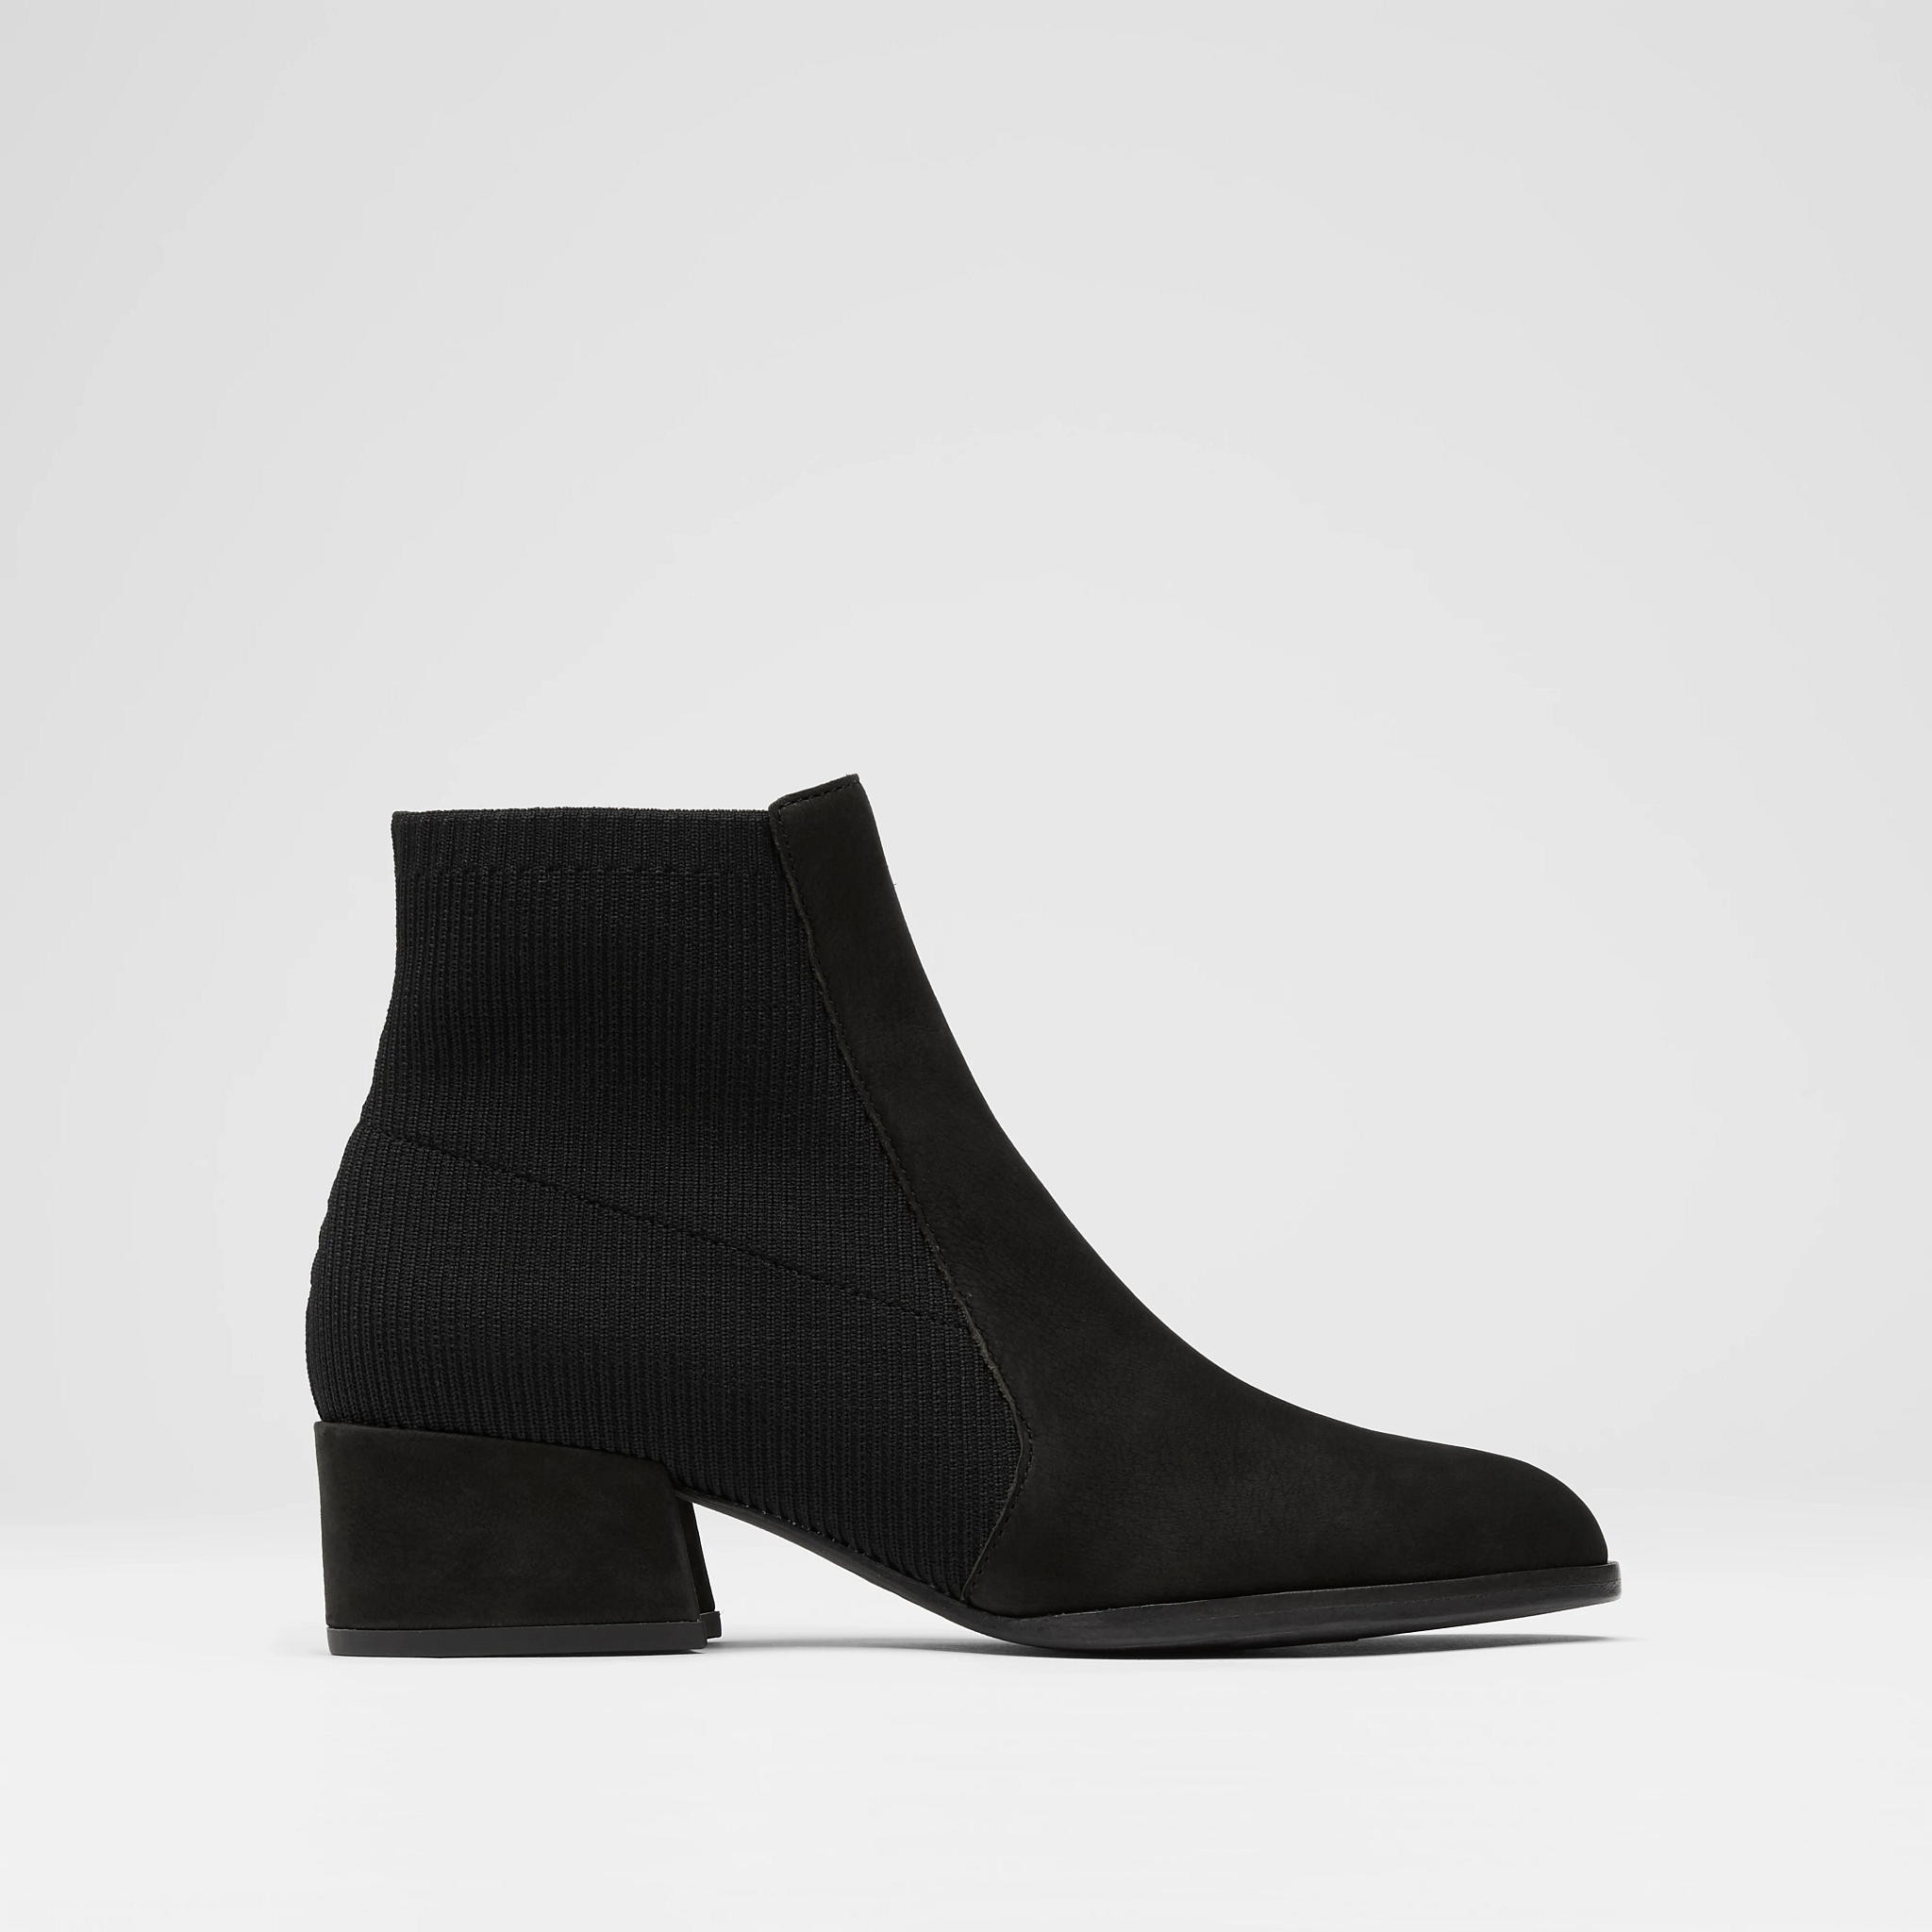 Aesop Tumbled Nubuck and Recycled Stretch Knit Bootie | EILEEN FISHER